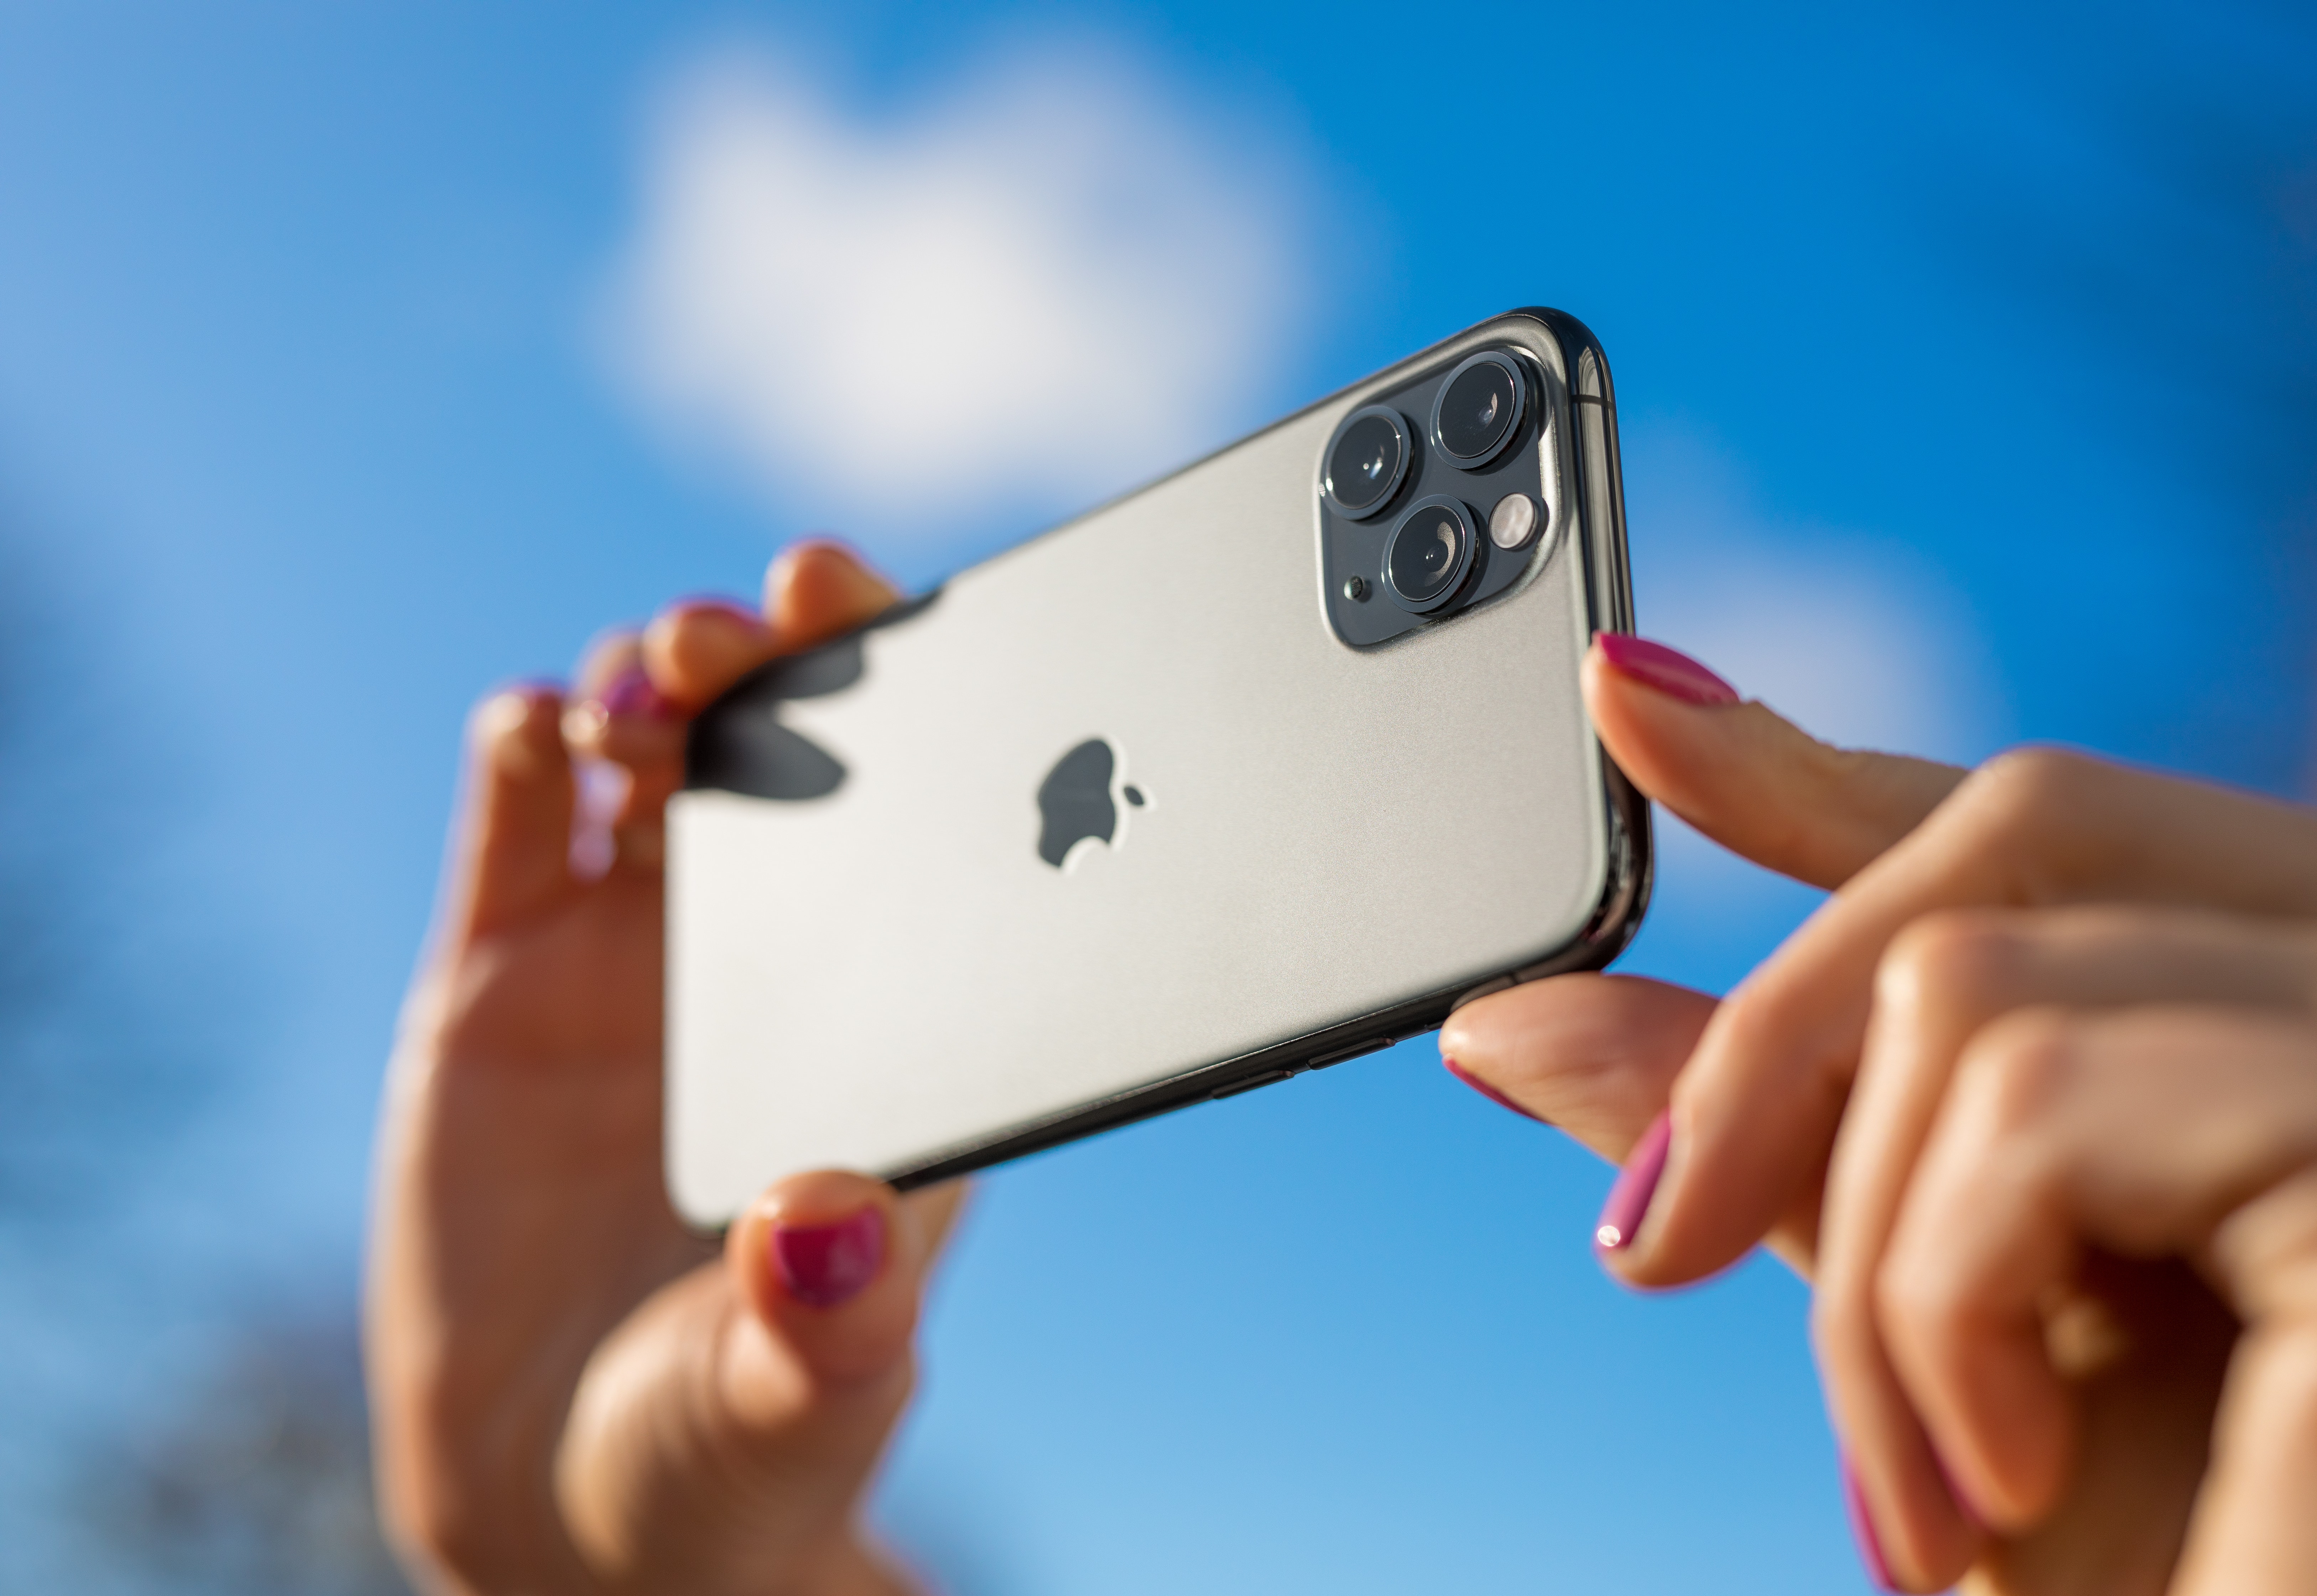 Apple's iPhone 14 Front Camera Upgrade: 7 Suppliers That Stand To Benefit